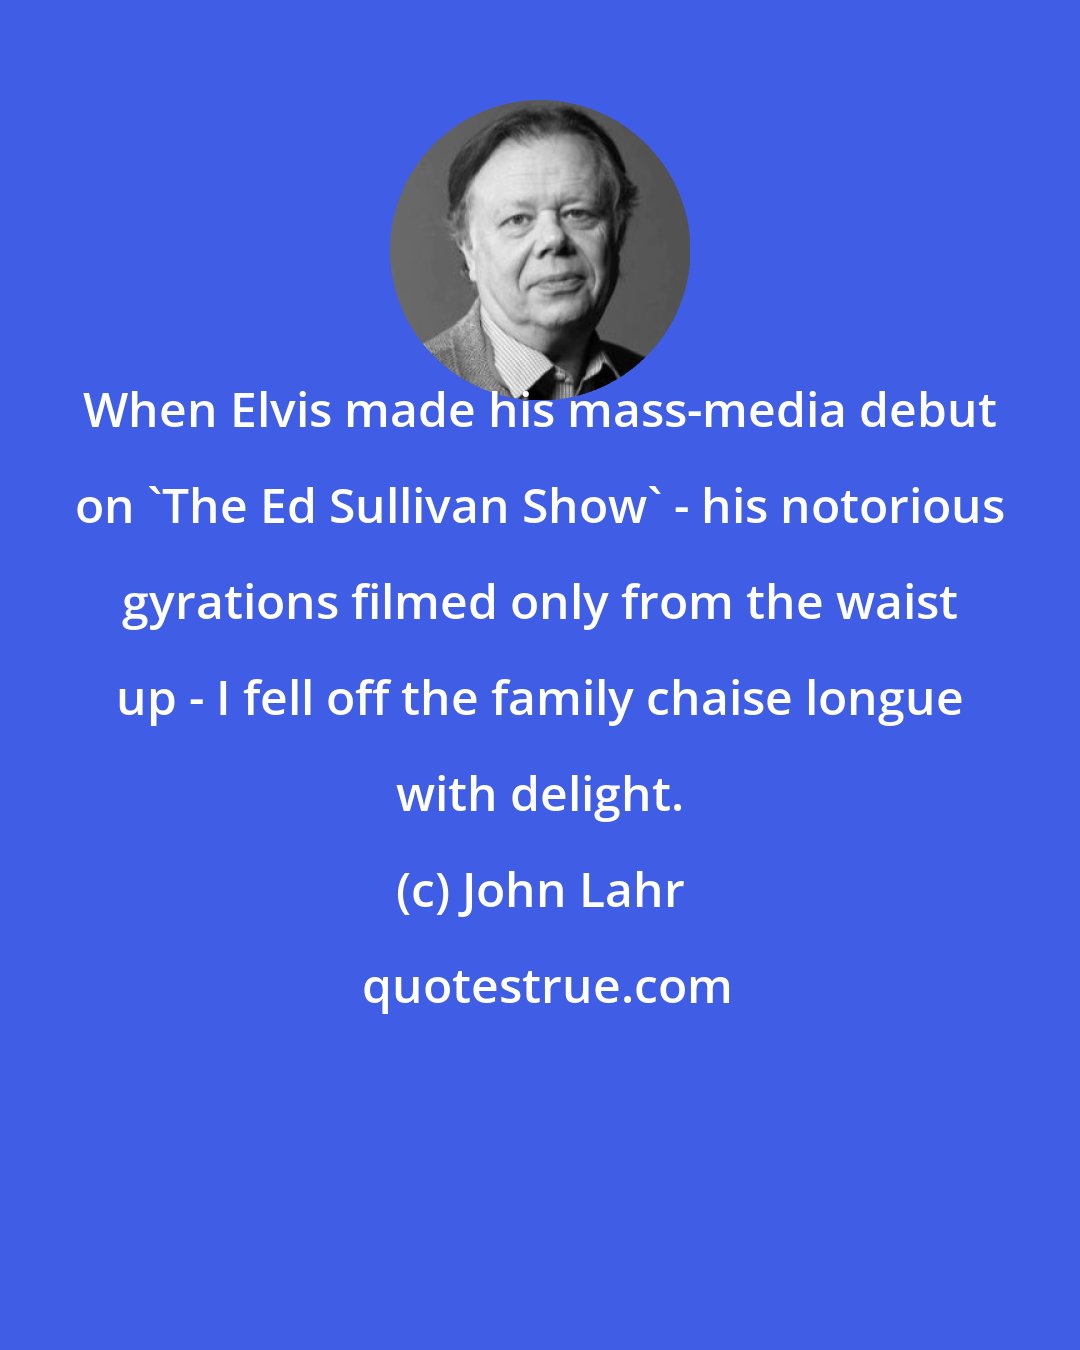 John Lahr: When Elvis made his mass-media debut on 'The Ed Sullivan Show' - his notorious gyrations filmed only from the waist up - I fell off the family chaise longue with delight.